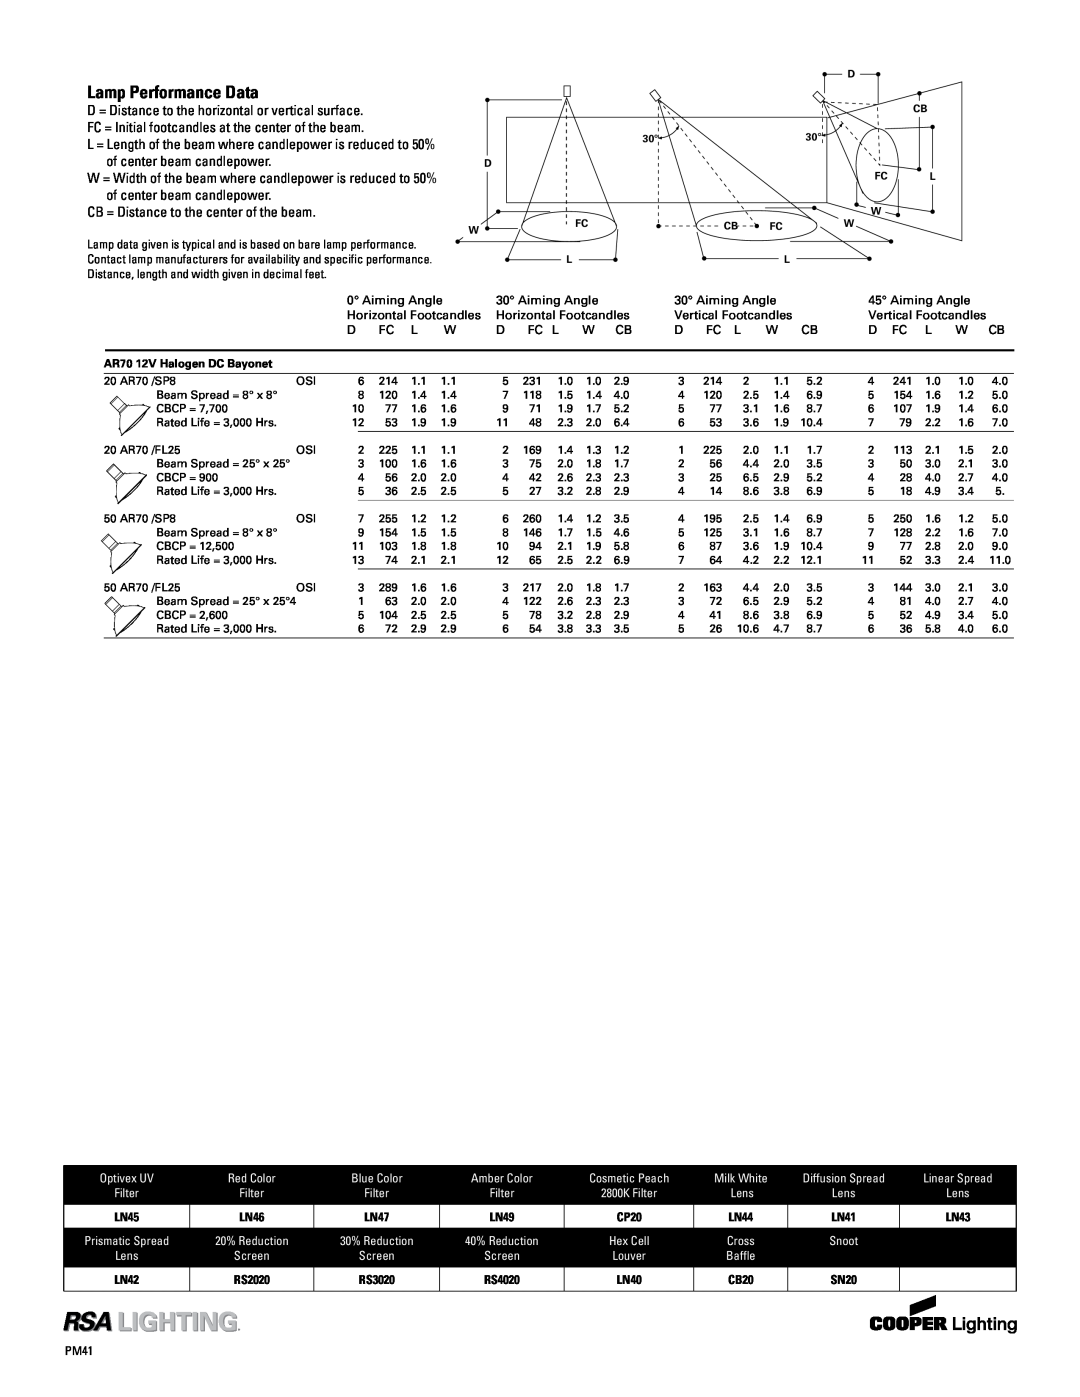 Cooper Lighting PM613CB specifications Lamp Performance Data 